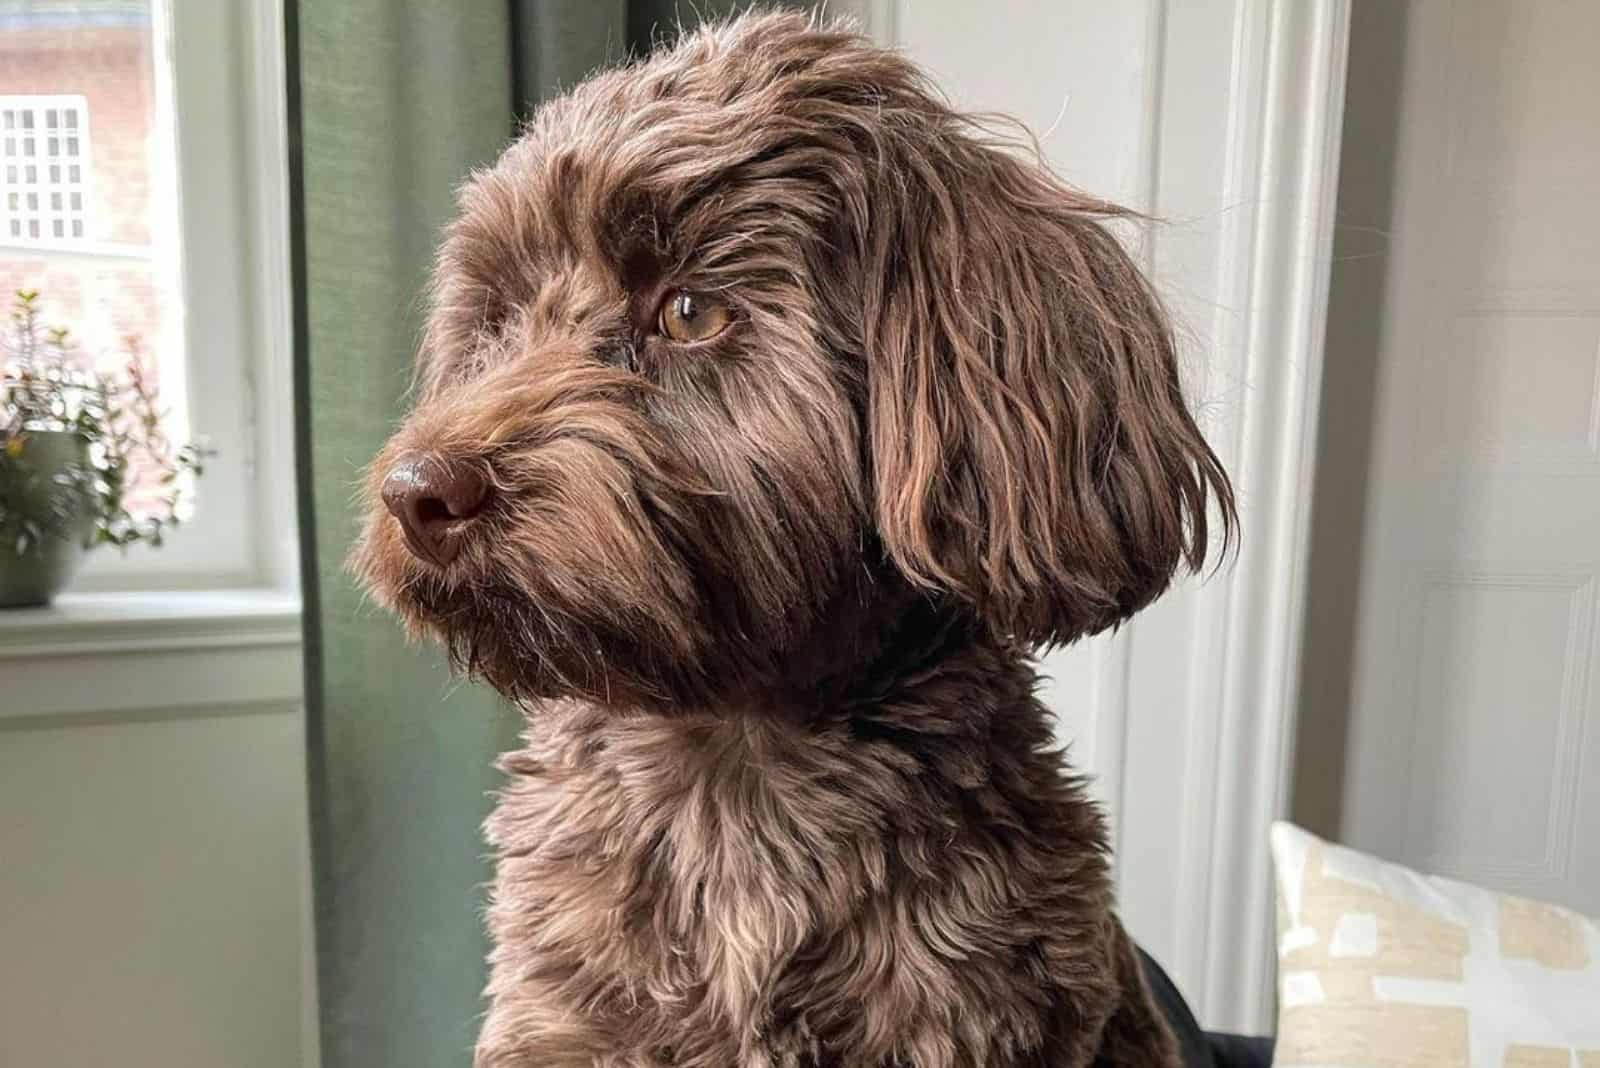 Chocolate Havanese puppy at home